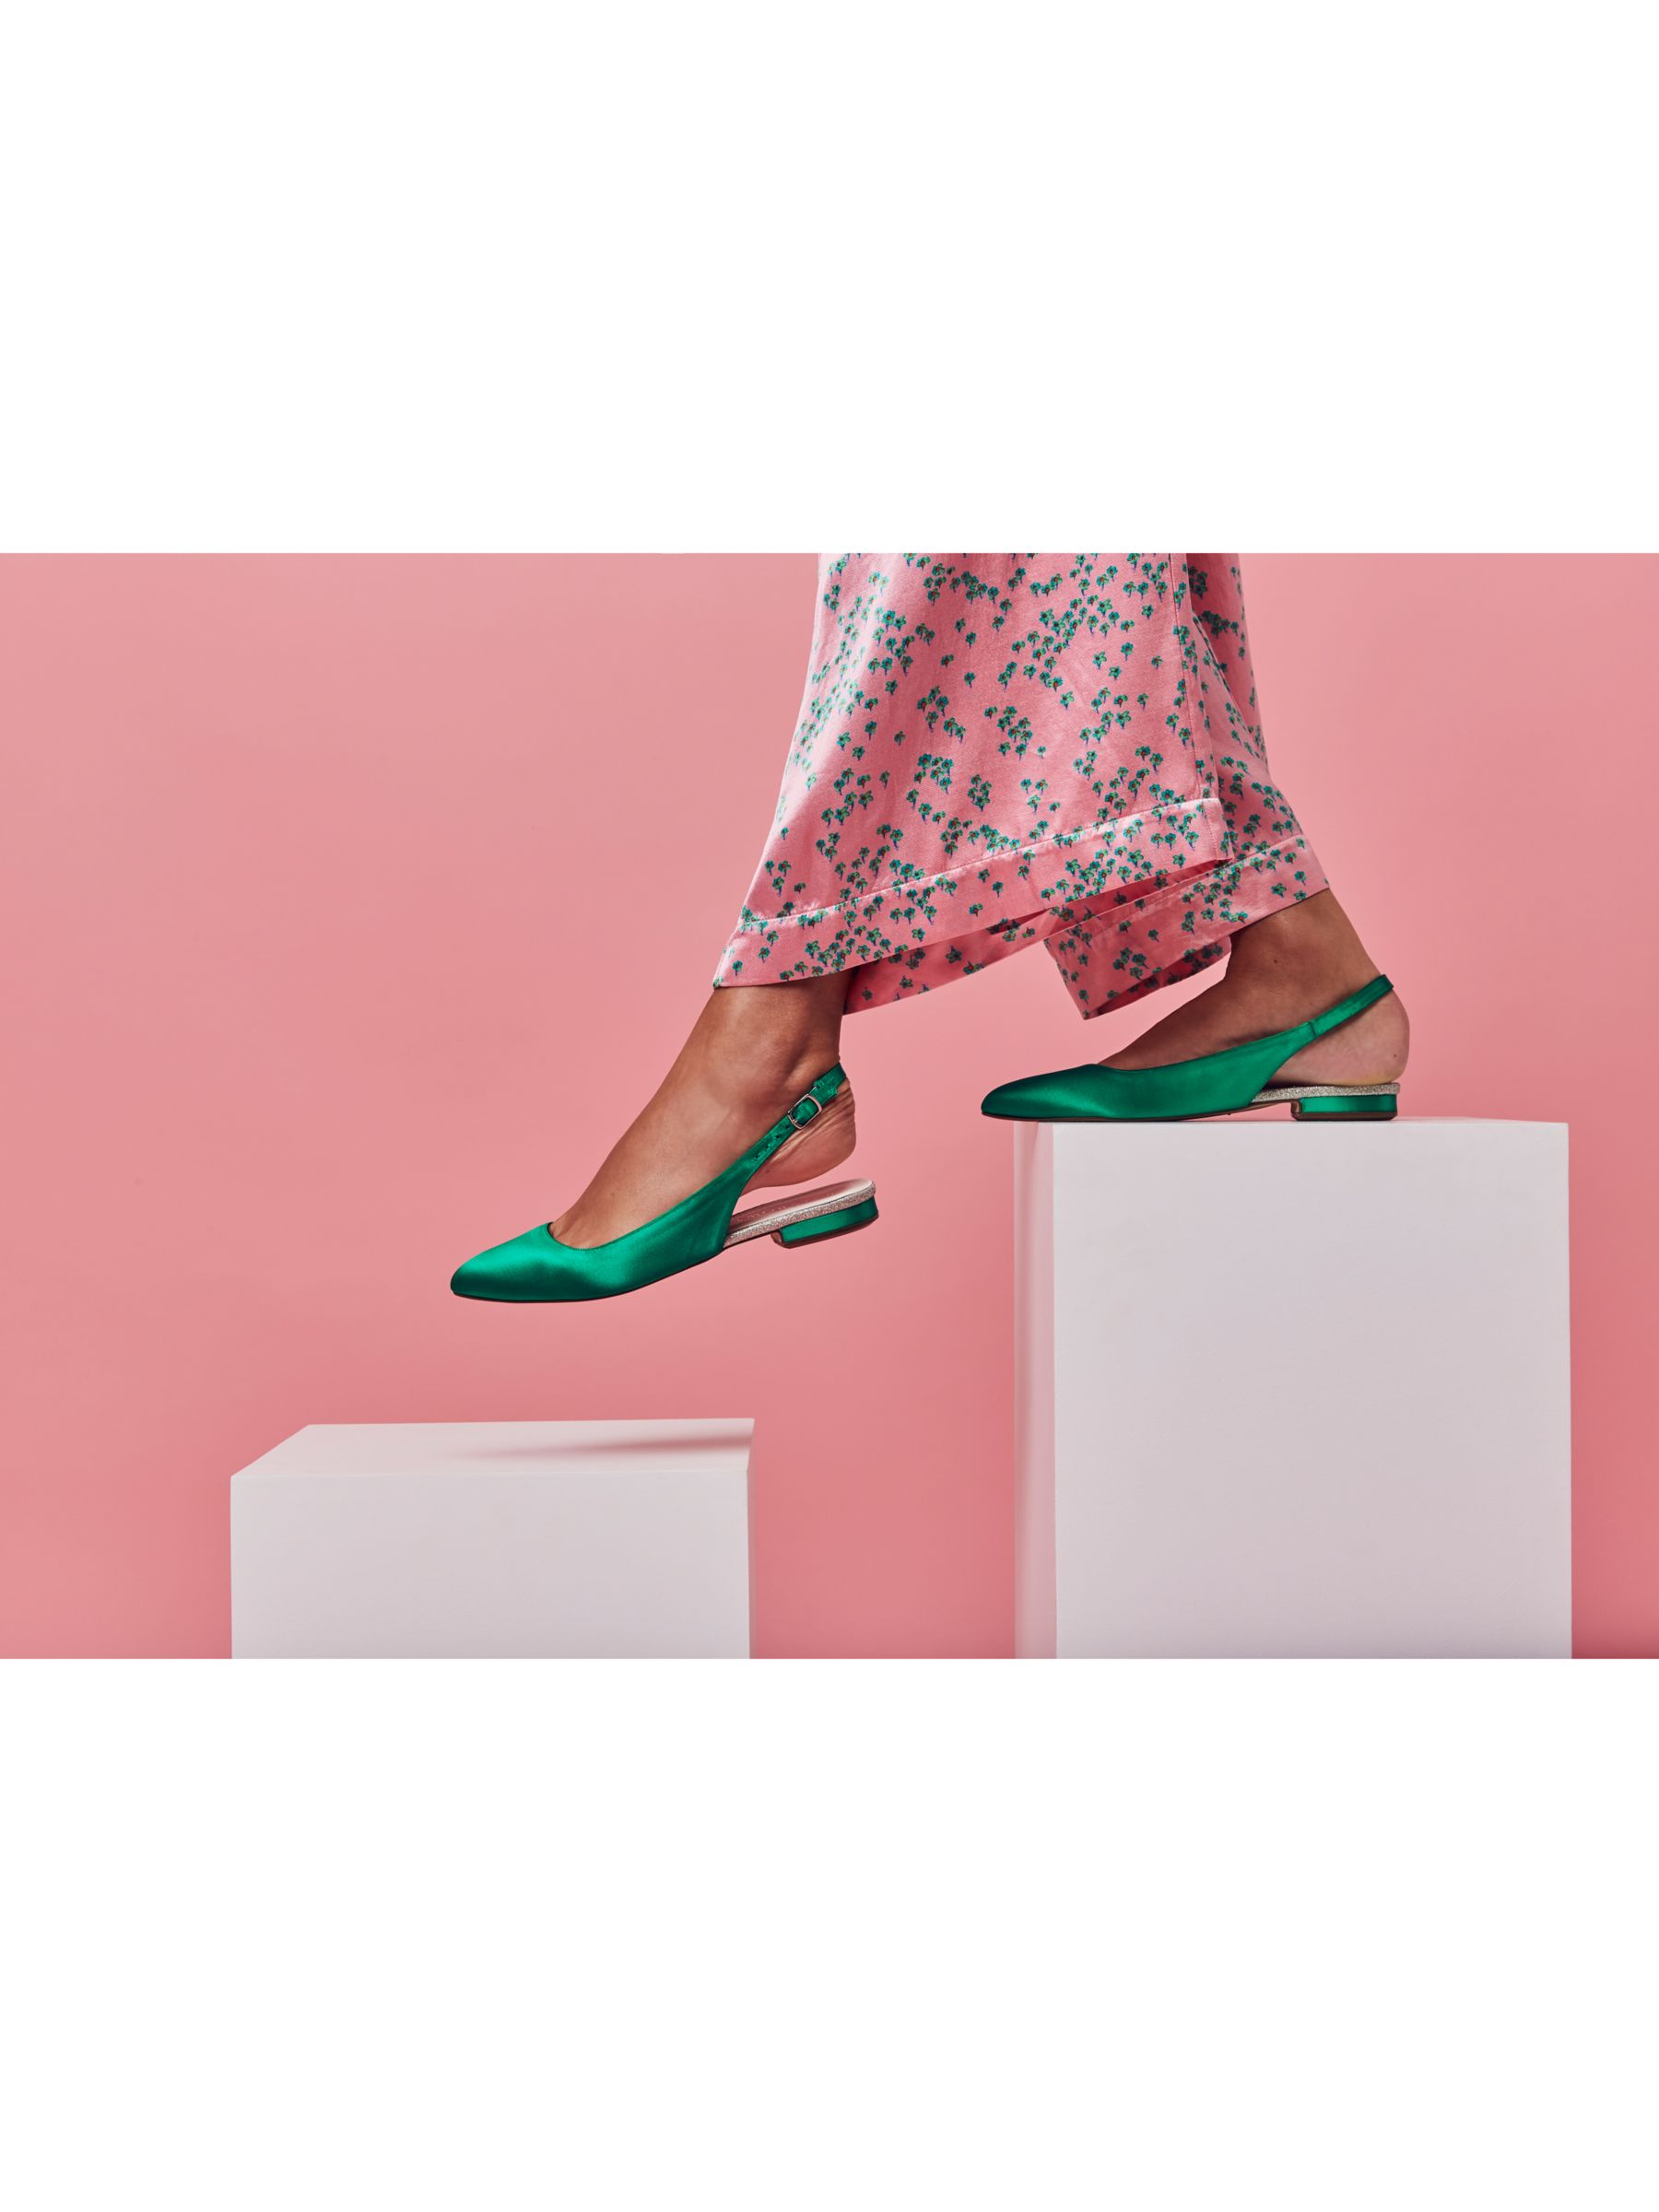 Rainbow Club Women's Shoes Direct Dye Pack at John Lewis & Partners